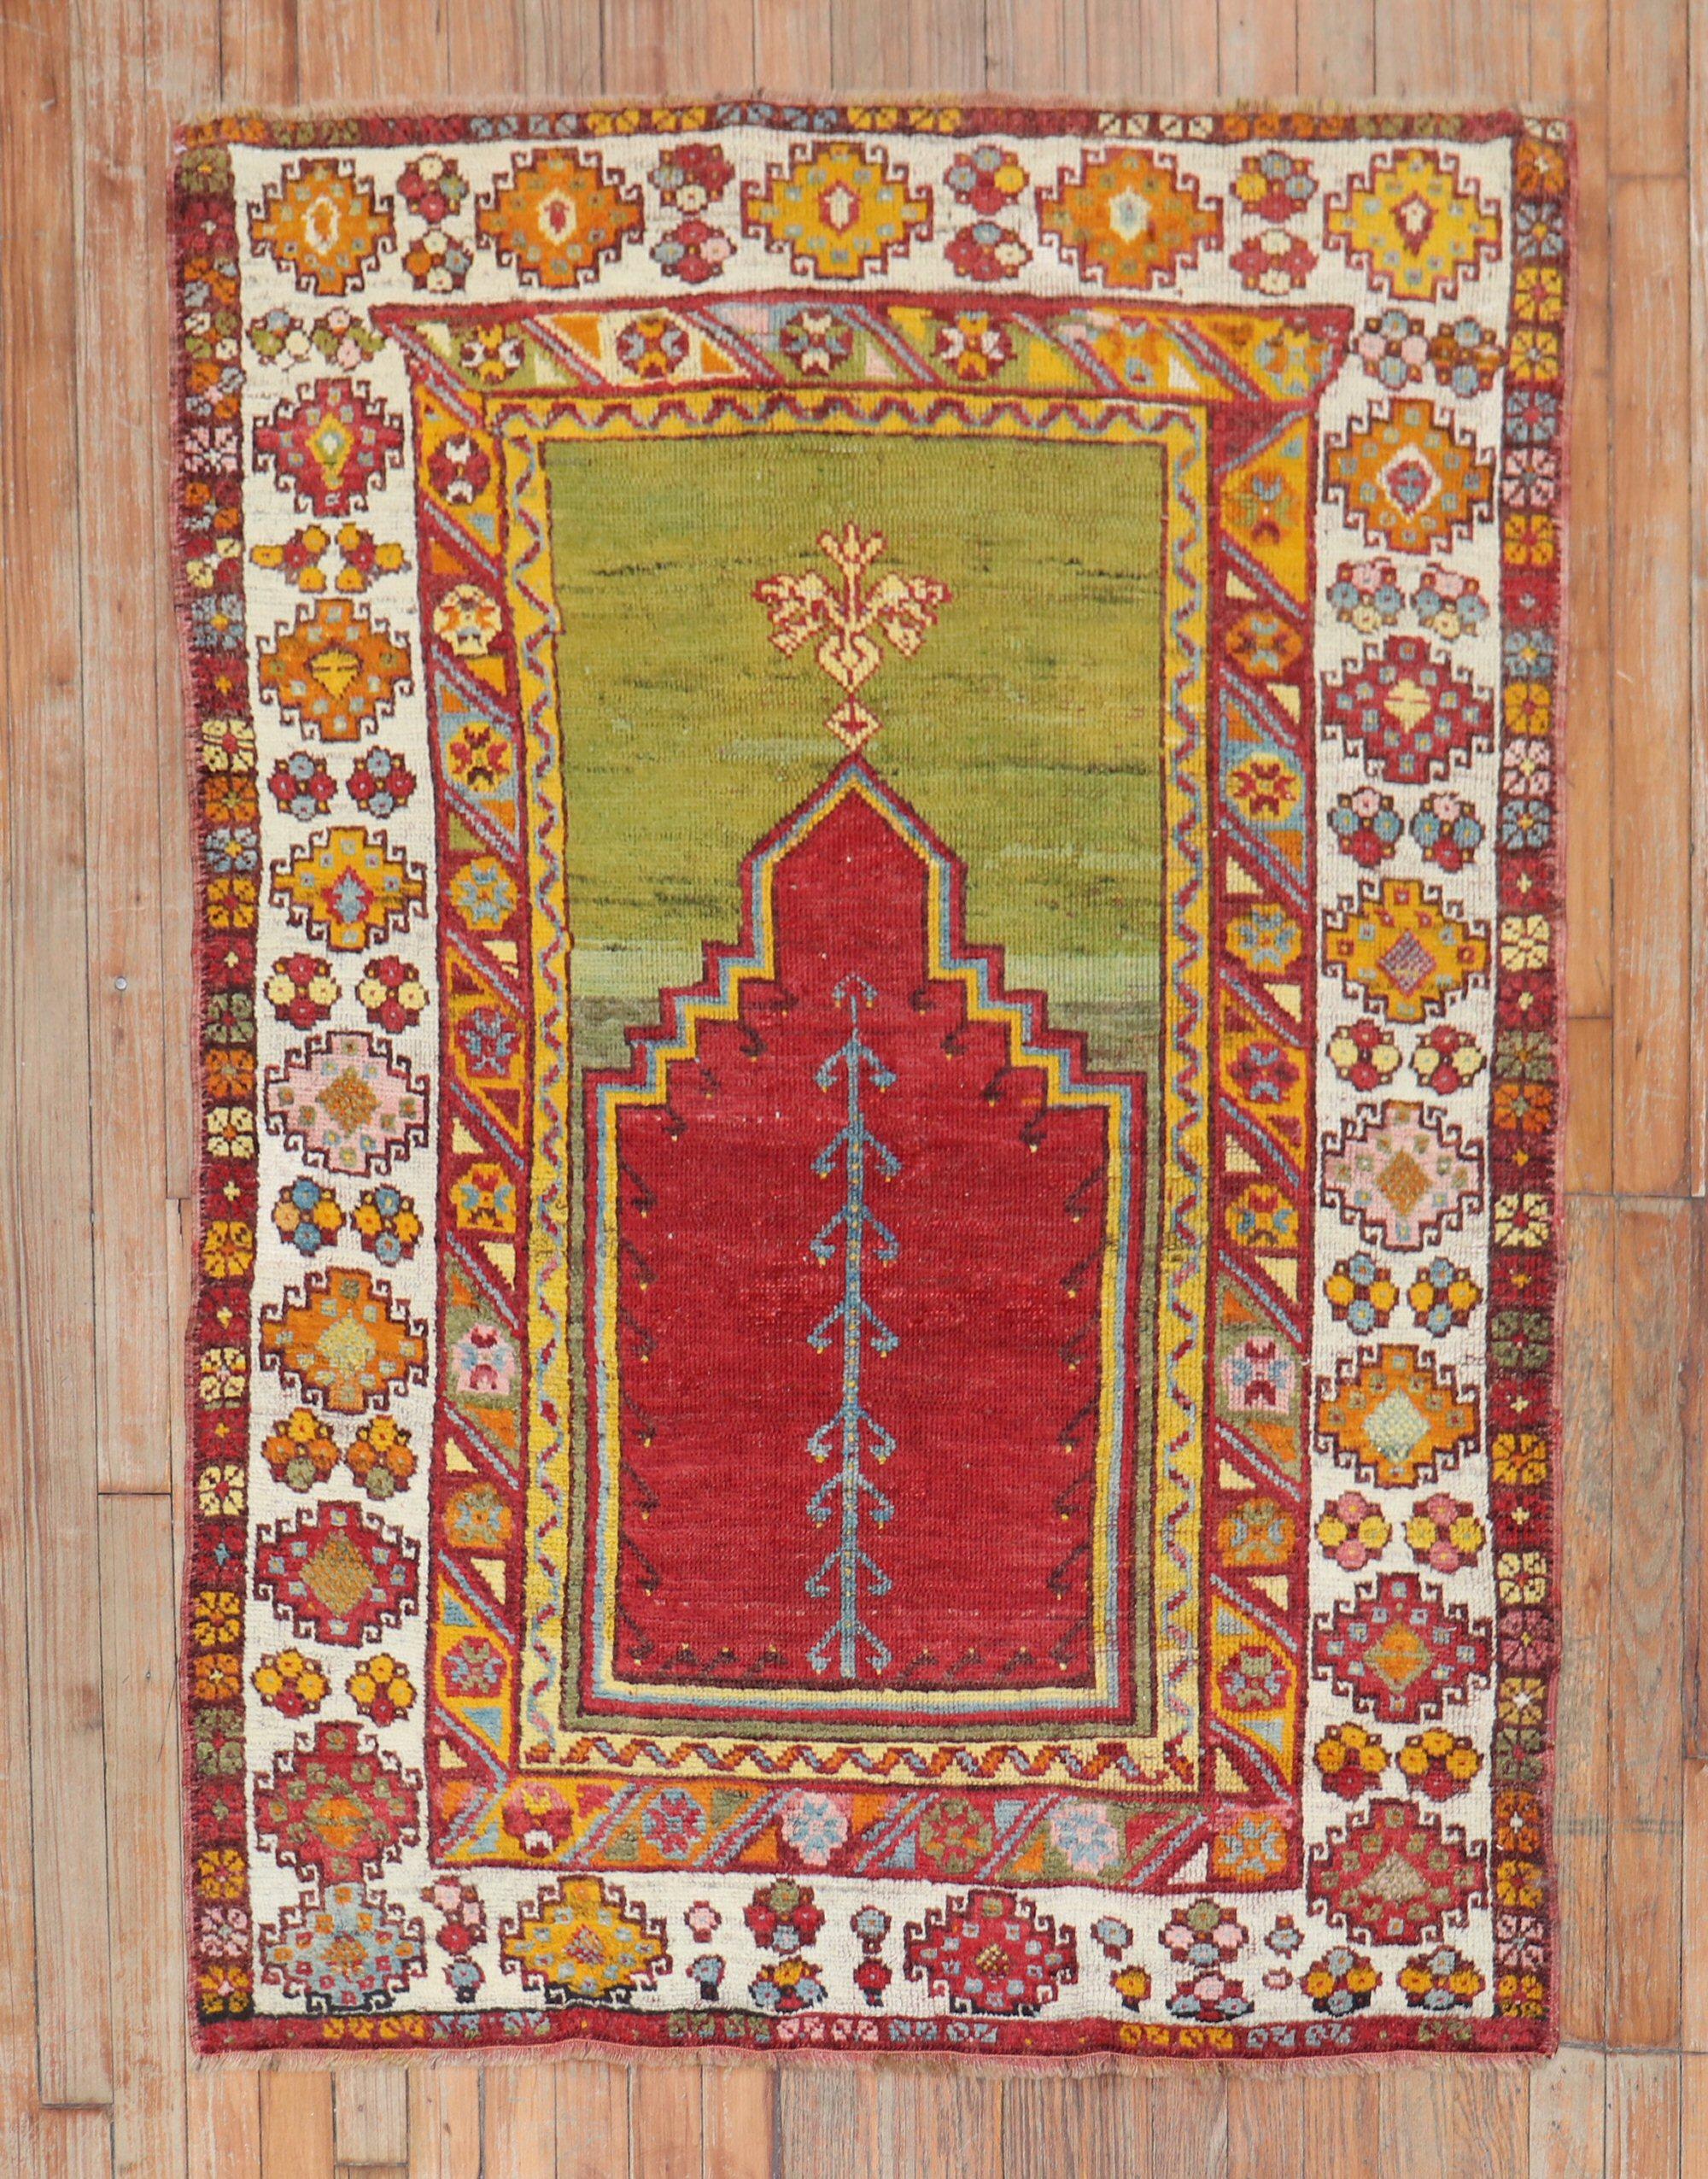 Mid 20th century colorful Turkish Melas rug in bright colors highlighted by a mihrab prayer niche design

Measures: 3'6